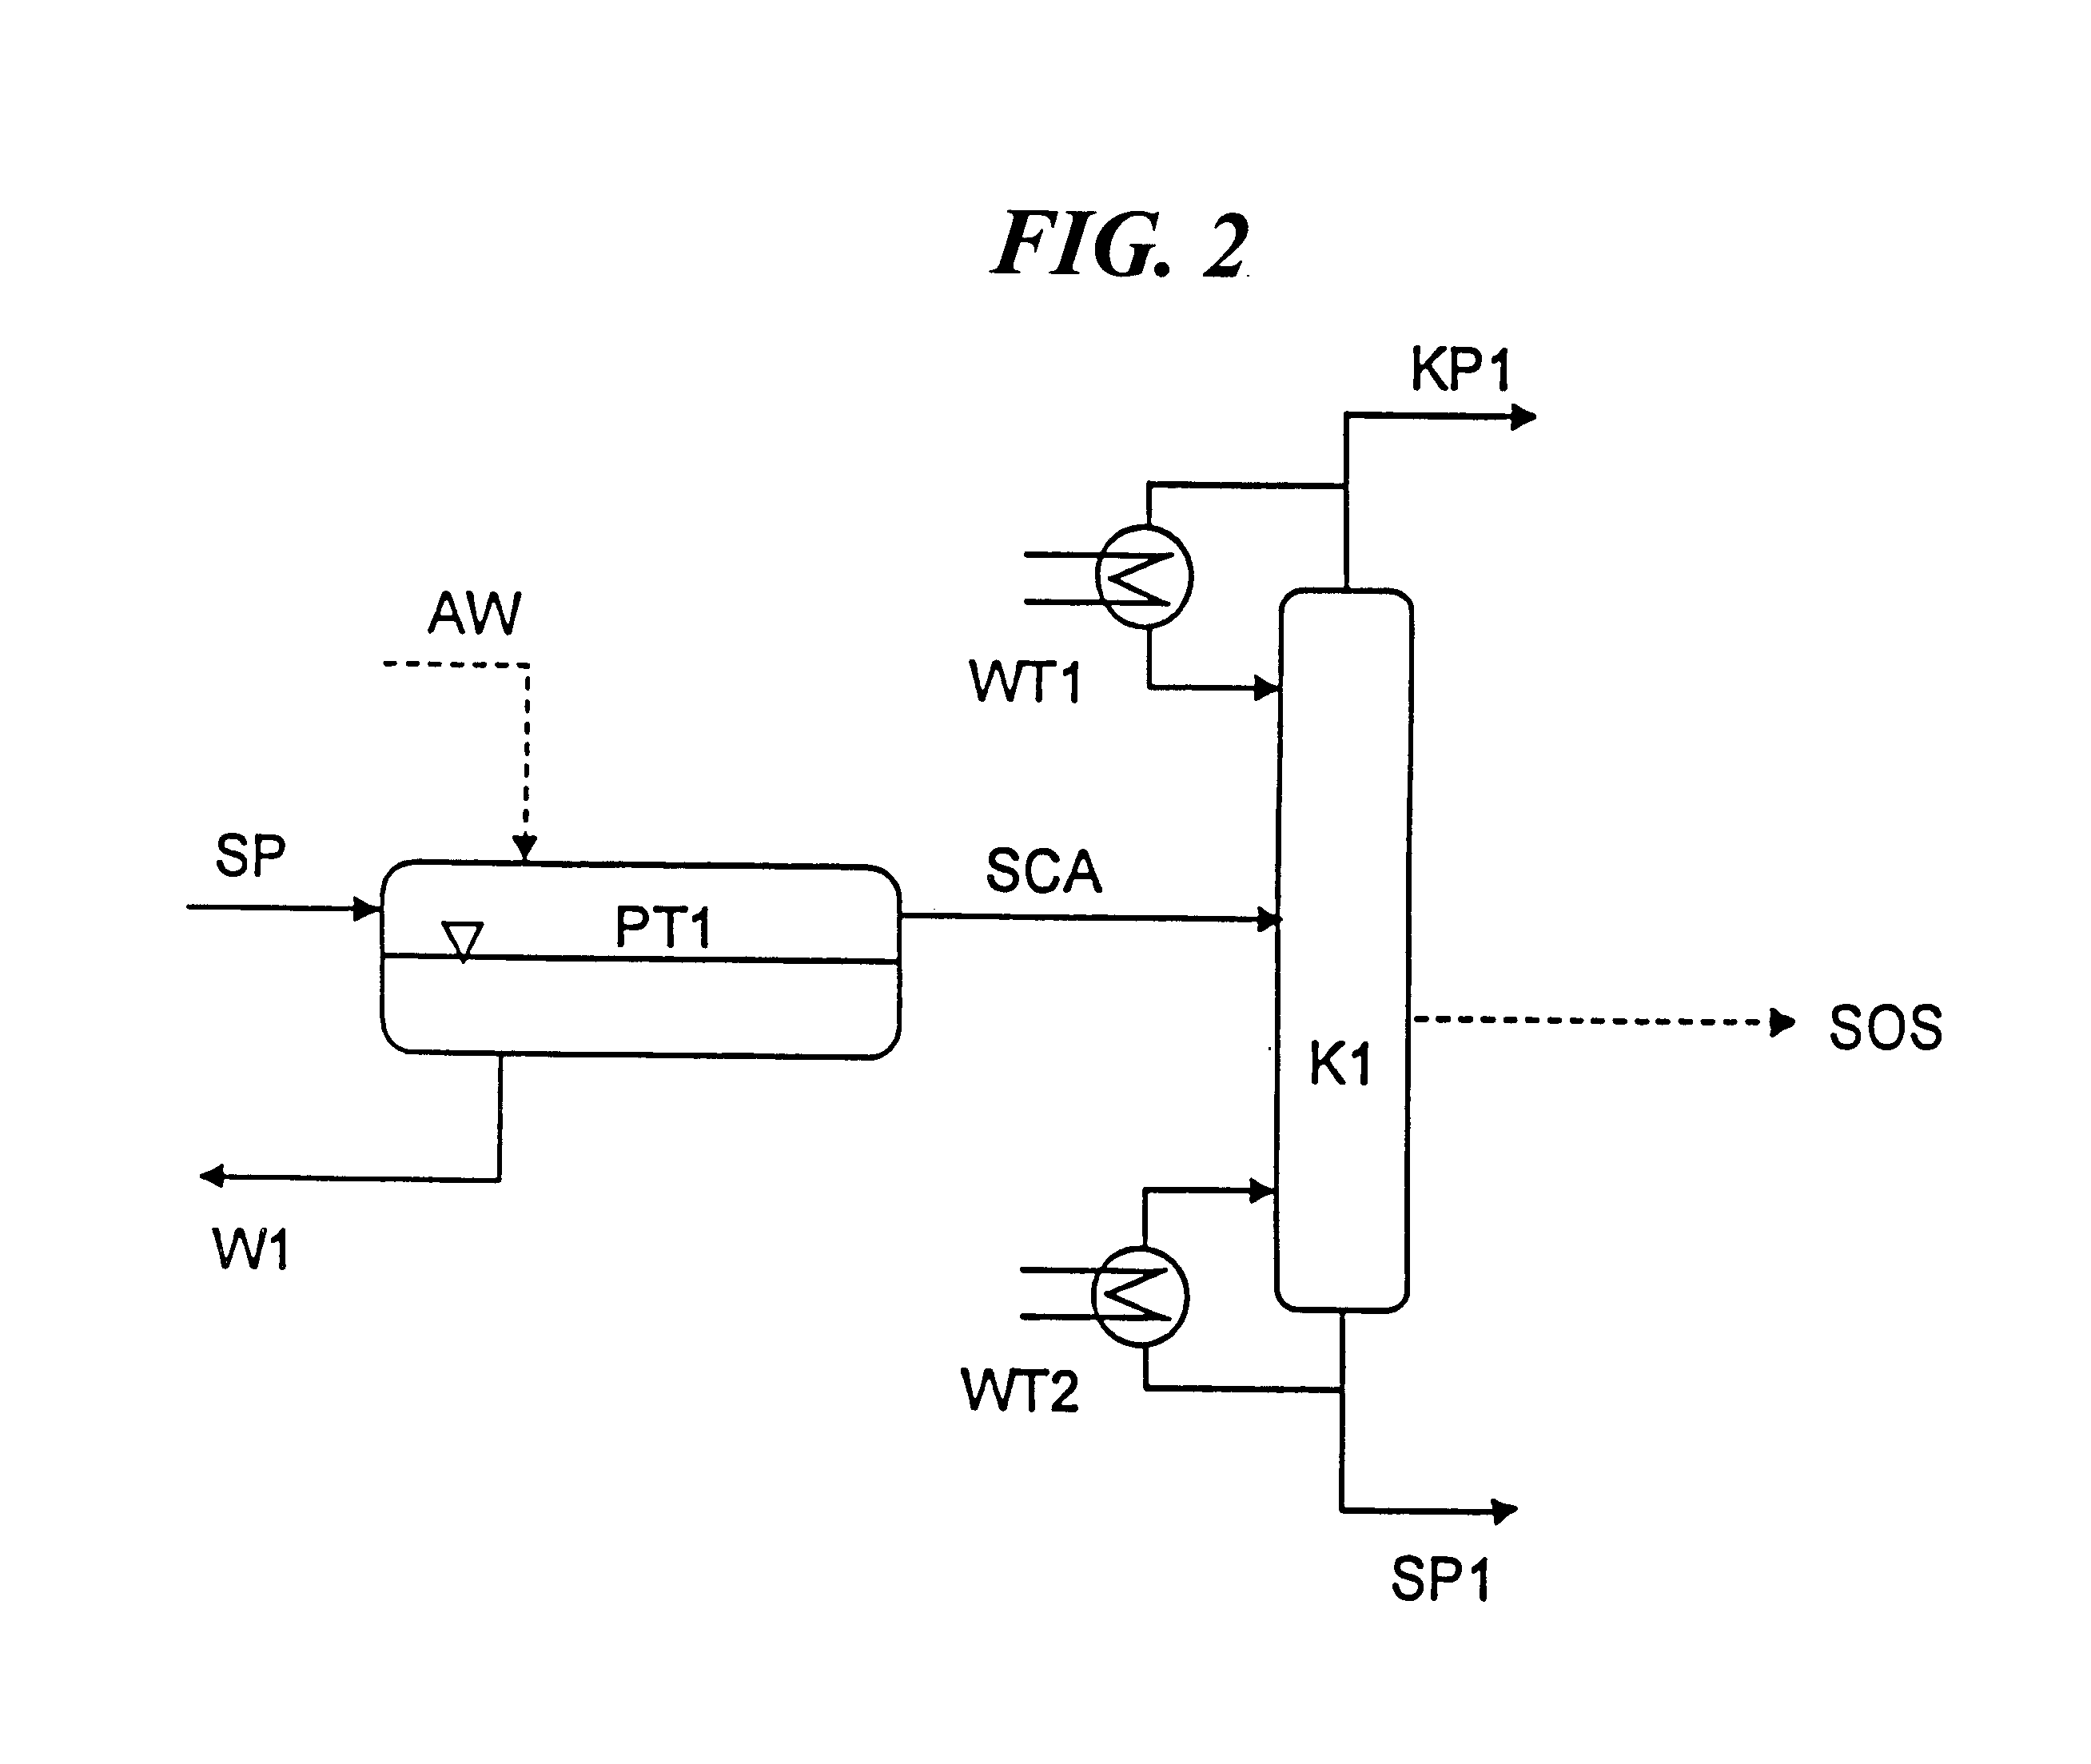 Process for separating phenol from a mixture comprising at least hydroxyacetone, cumene, water and phenol